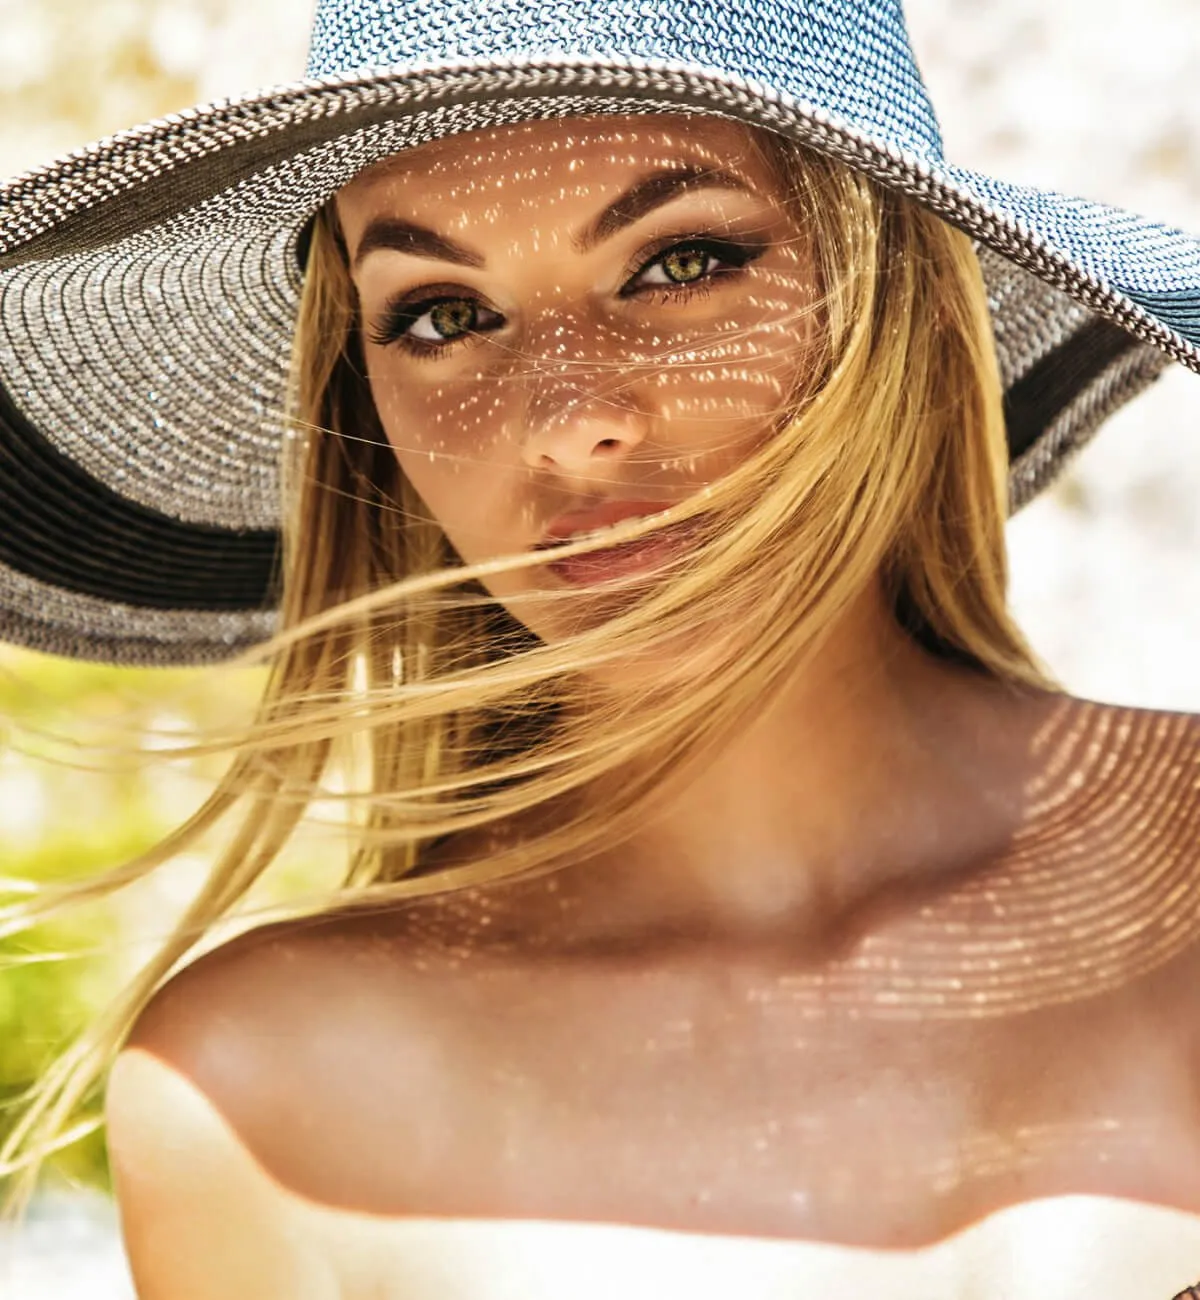 Blonde woman in black and white sun hat